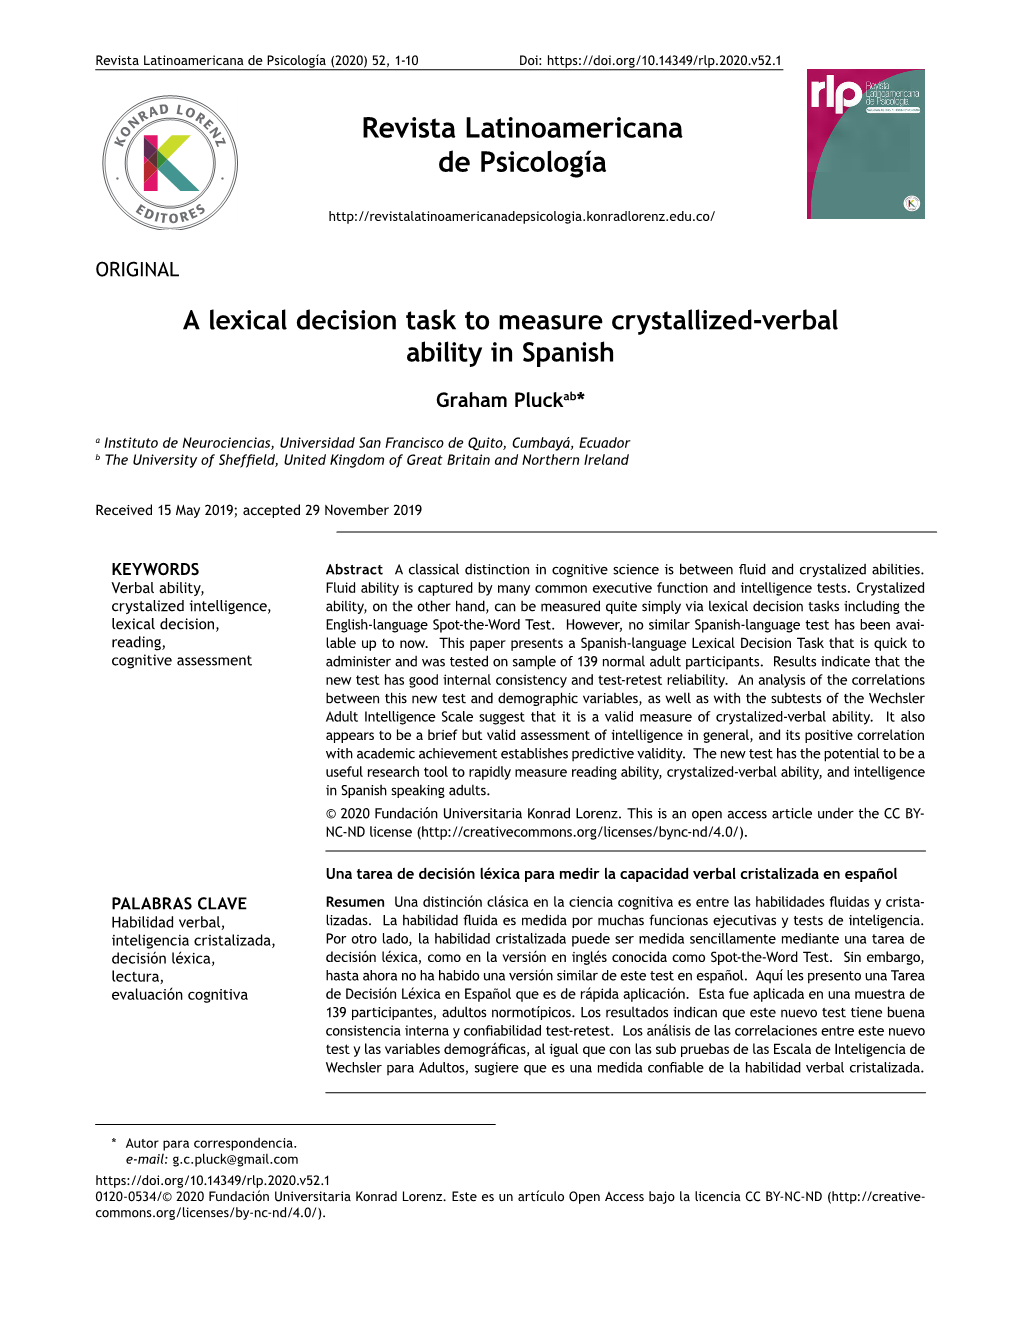 A Lexical Decision Task to Measure Crystallized-Verbal Ability in Spanish